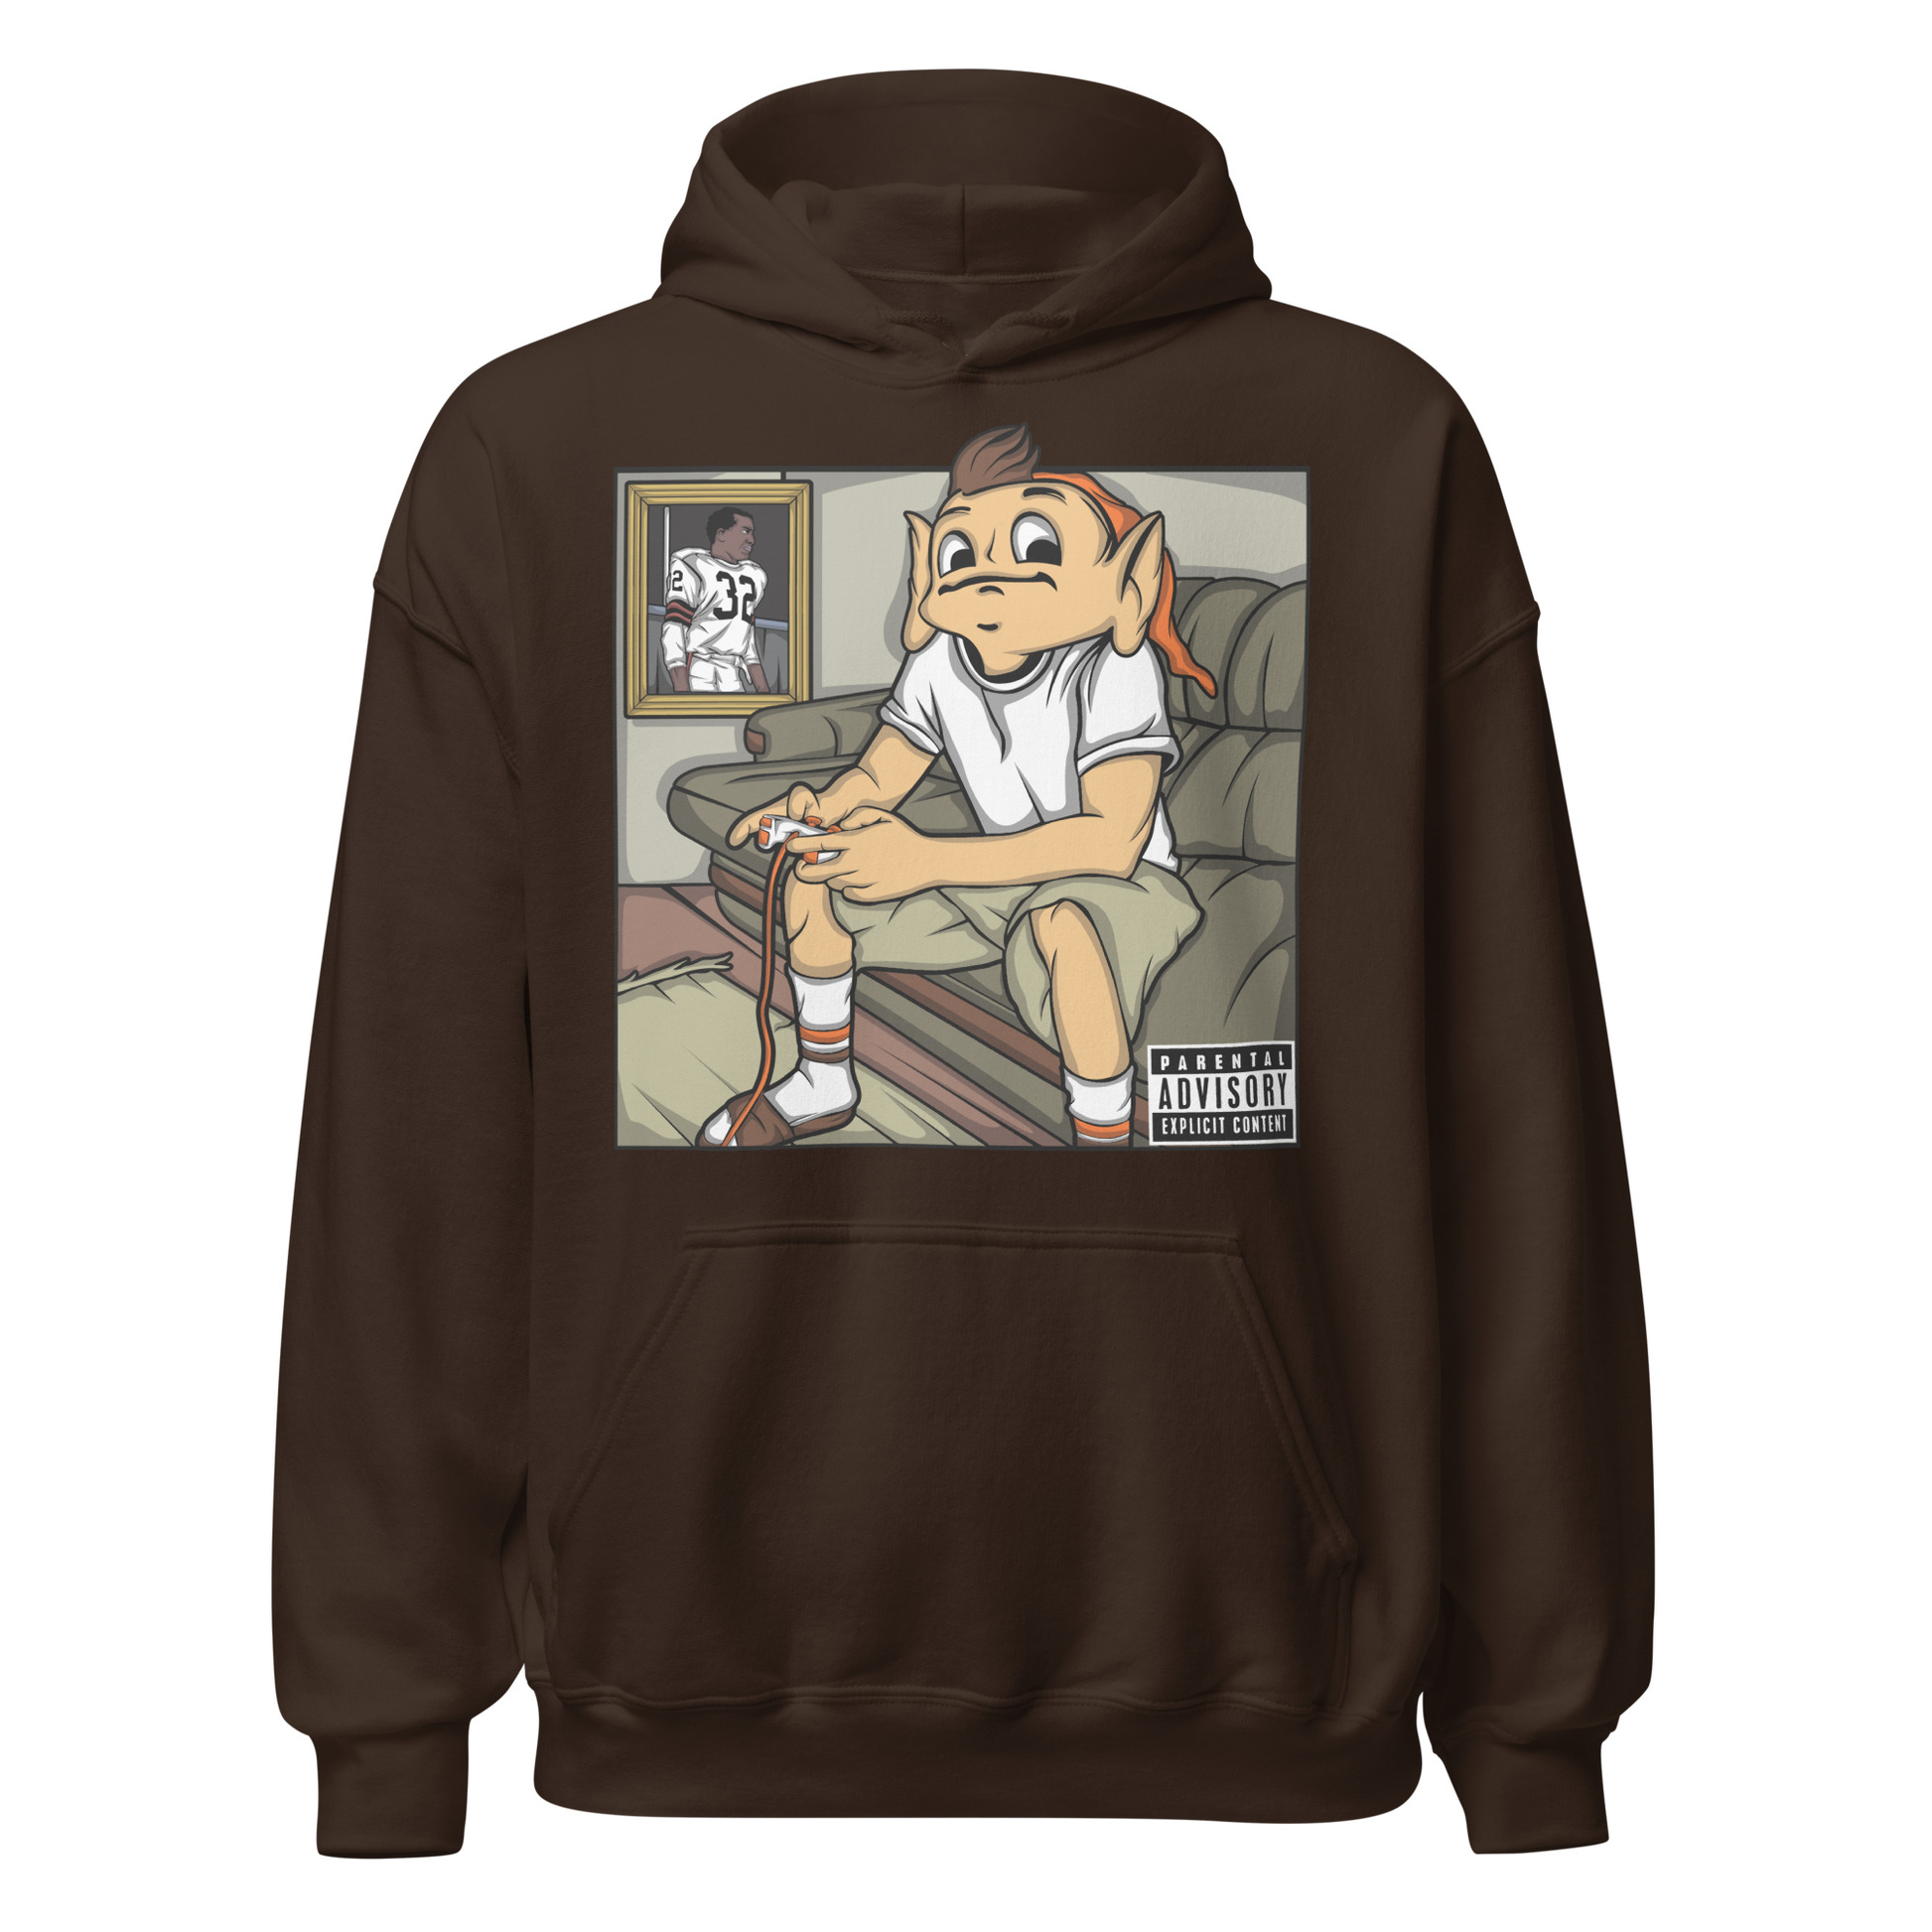 Brown hoodie with artwork centered